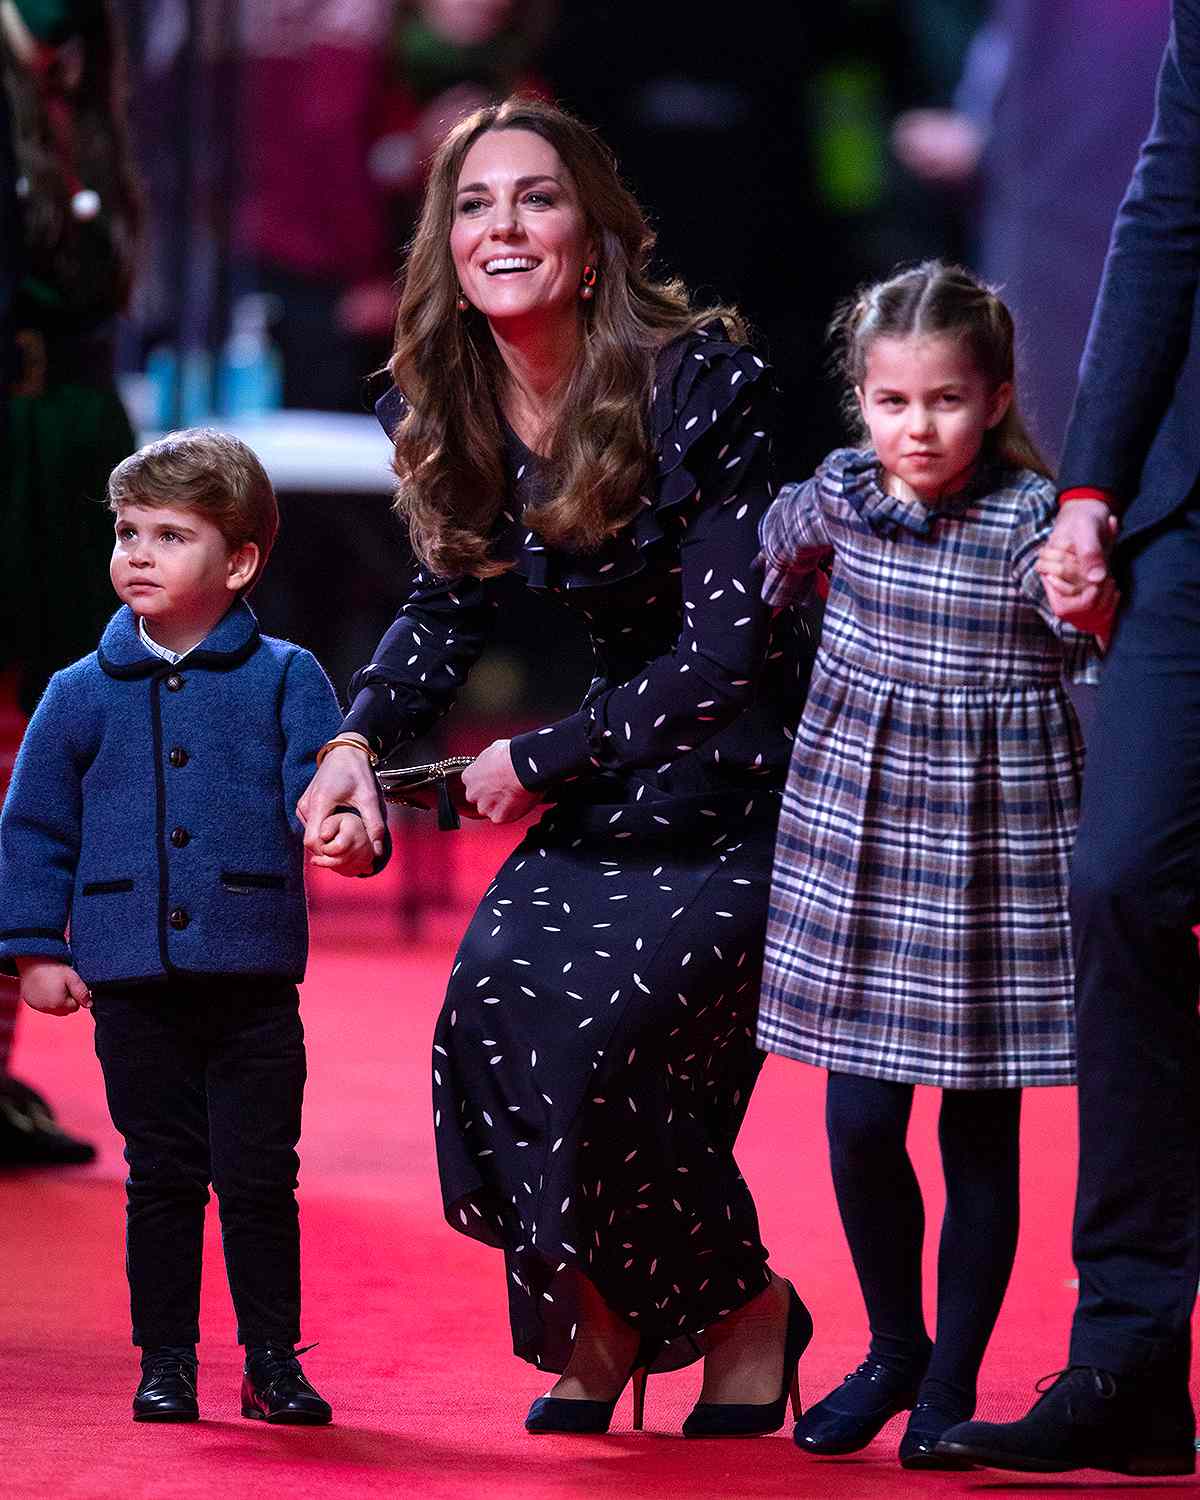 Princess Charlotte turns 6 and her mom Kate Middleton becomes her photographer!